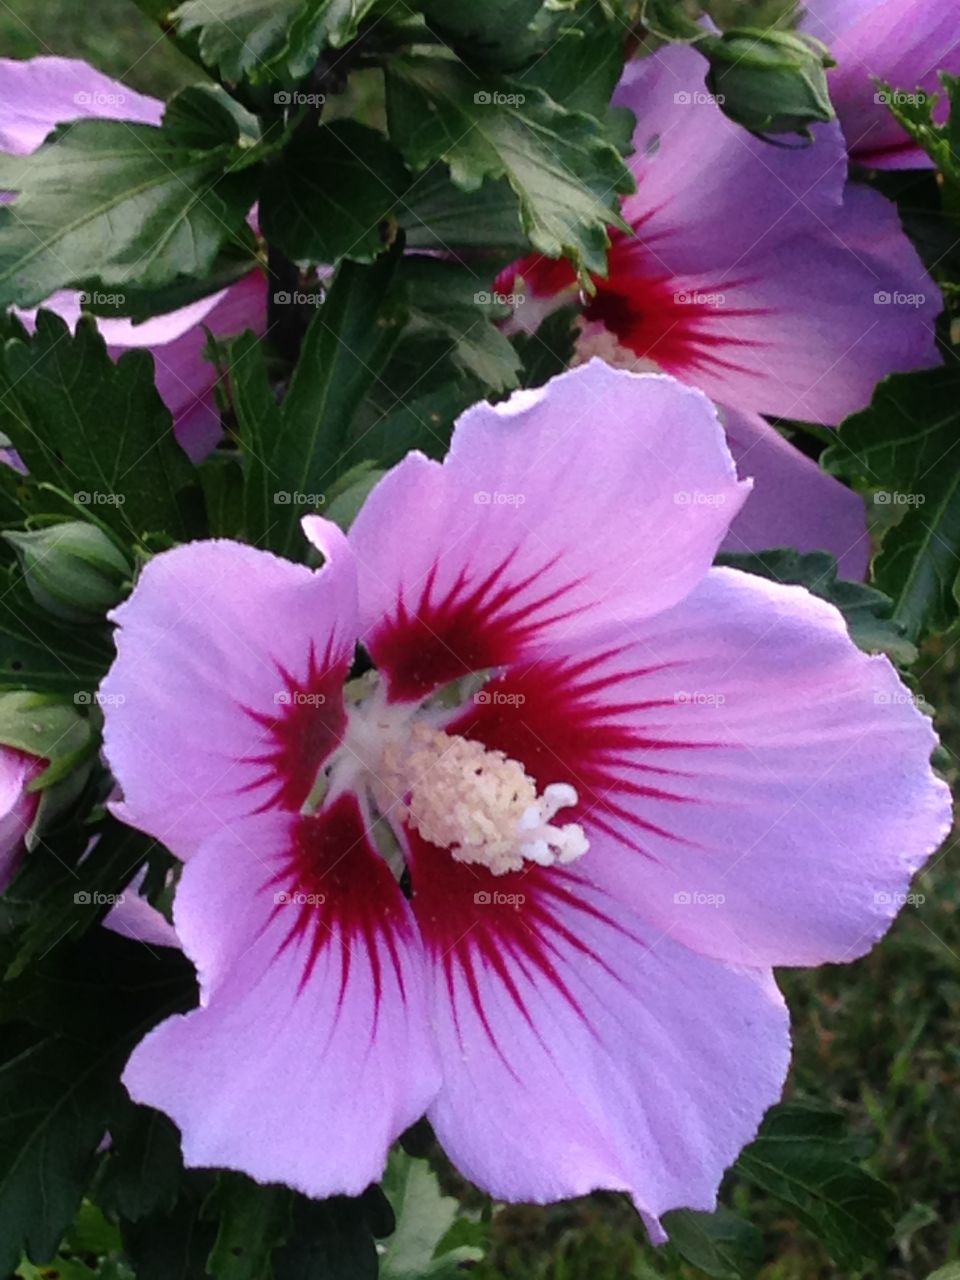 Rose of Sharon. Splashes of color in a beautiful flower